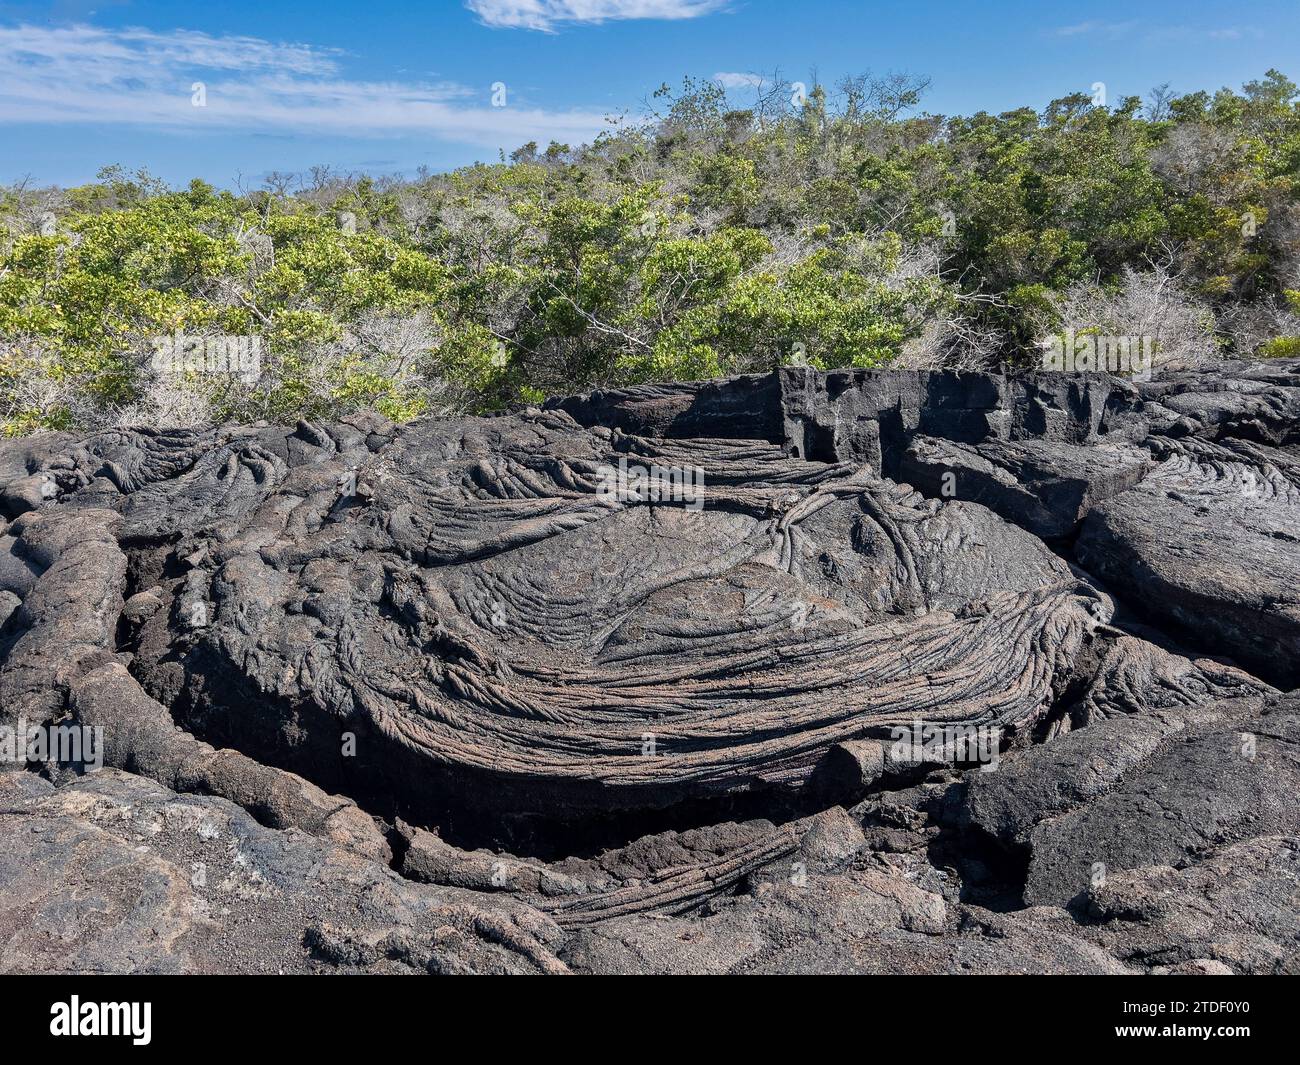 Pahoehoe lava on the youngest island in the Galapagos, Fernandina Island, Galapagos Islands, UNESCO World Heritage Site, Ecuador, South America Stock Photo